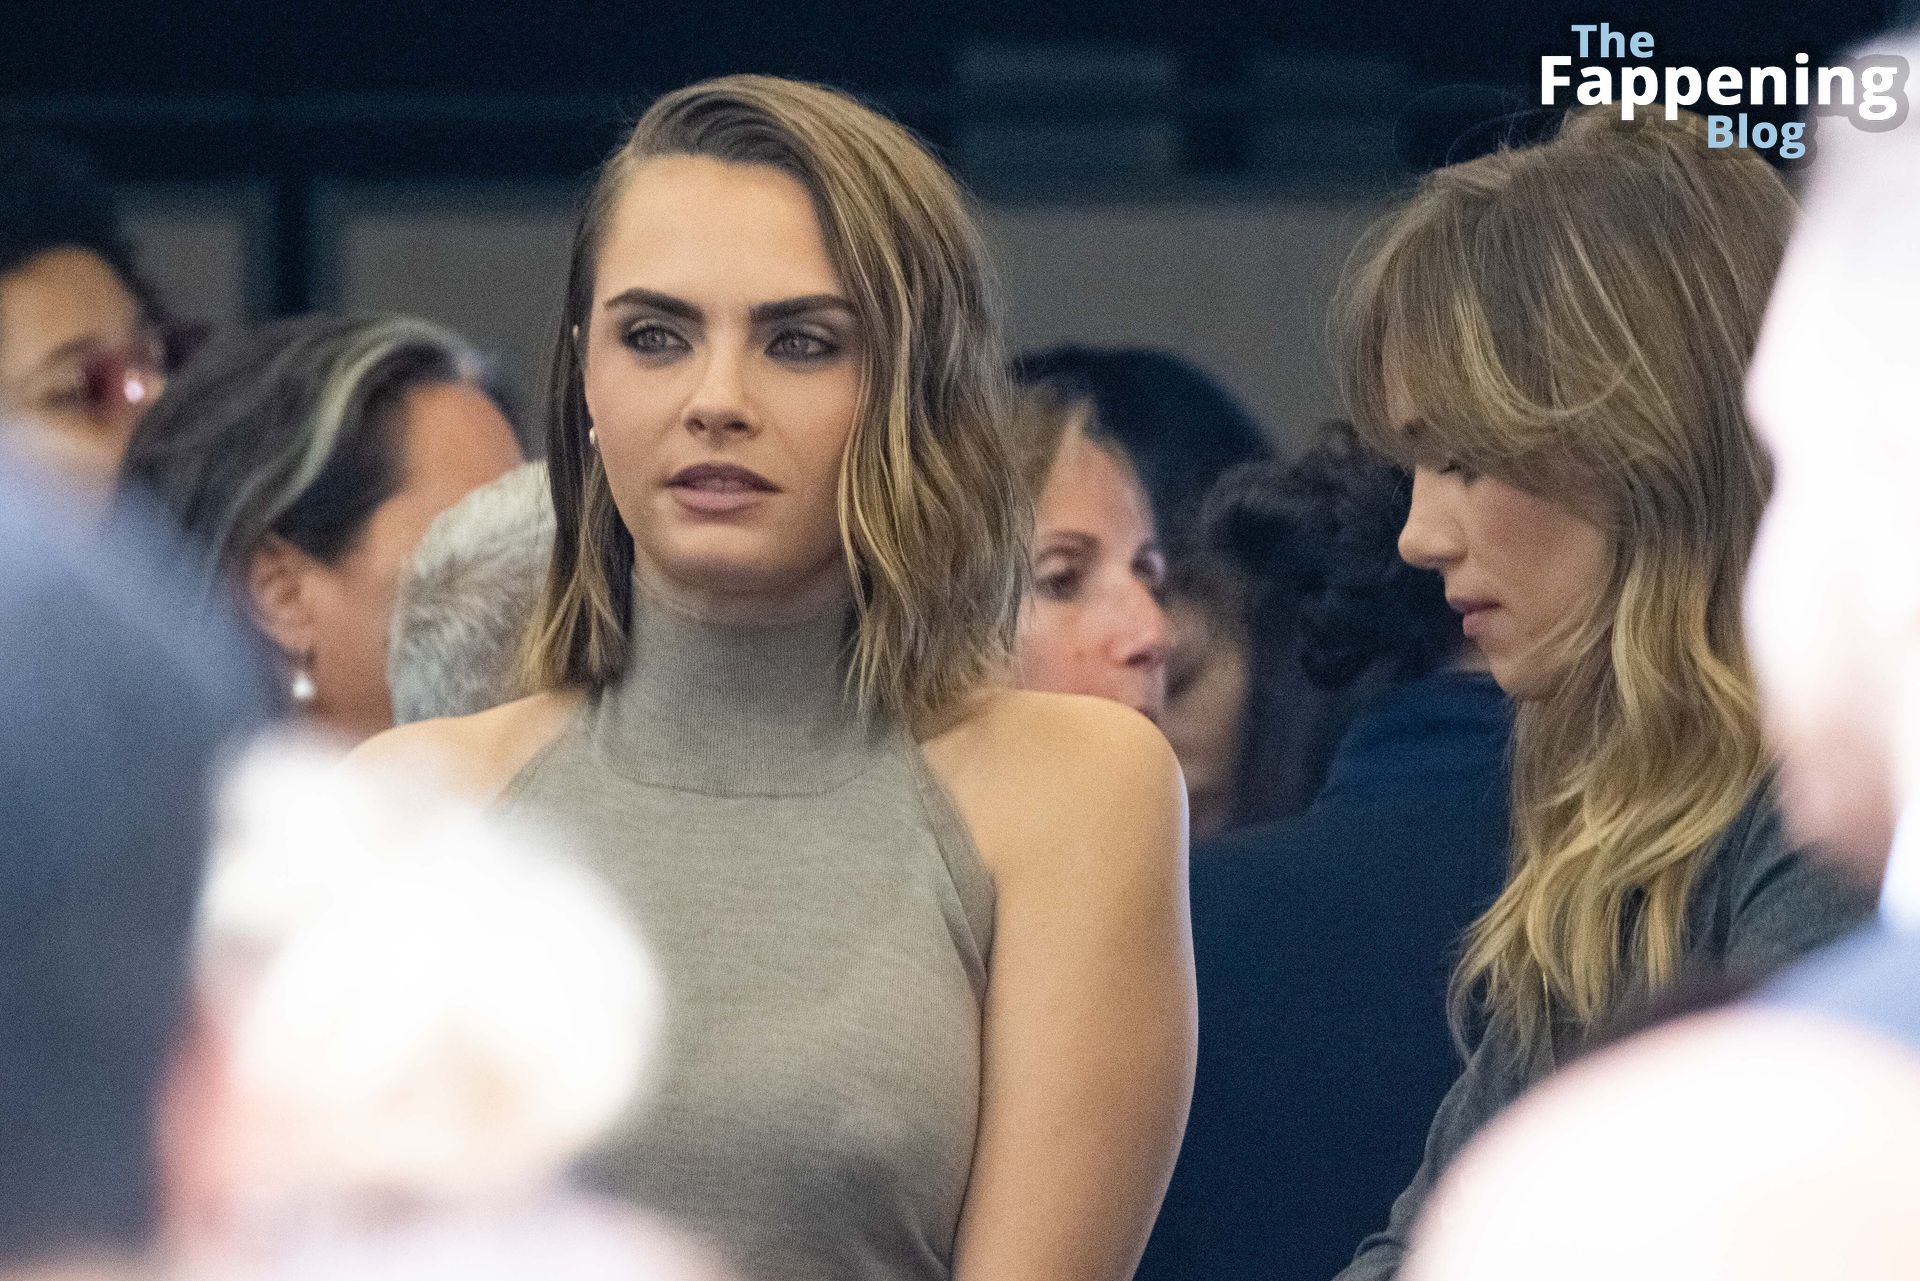 Cara-Delevingne-Sexy-70-The-Fappening-Blog.jpg